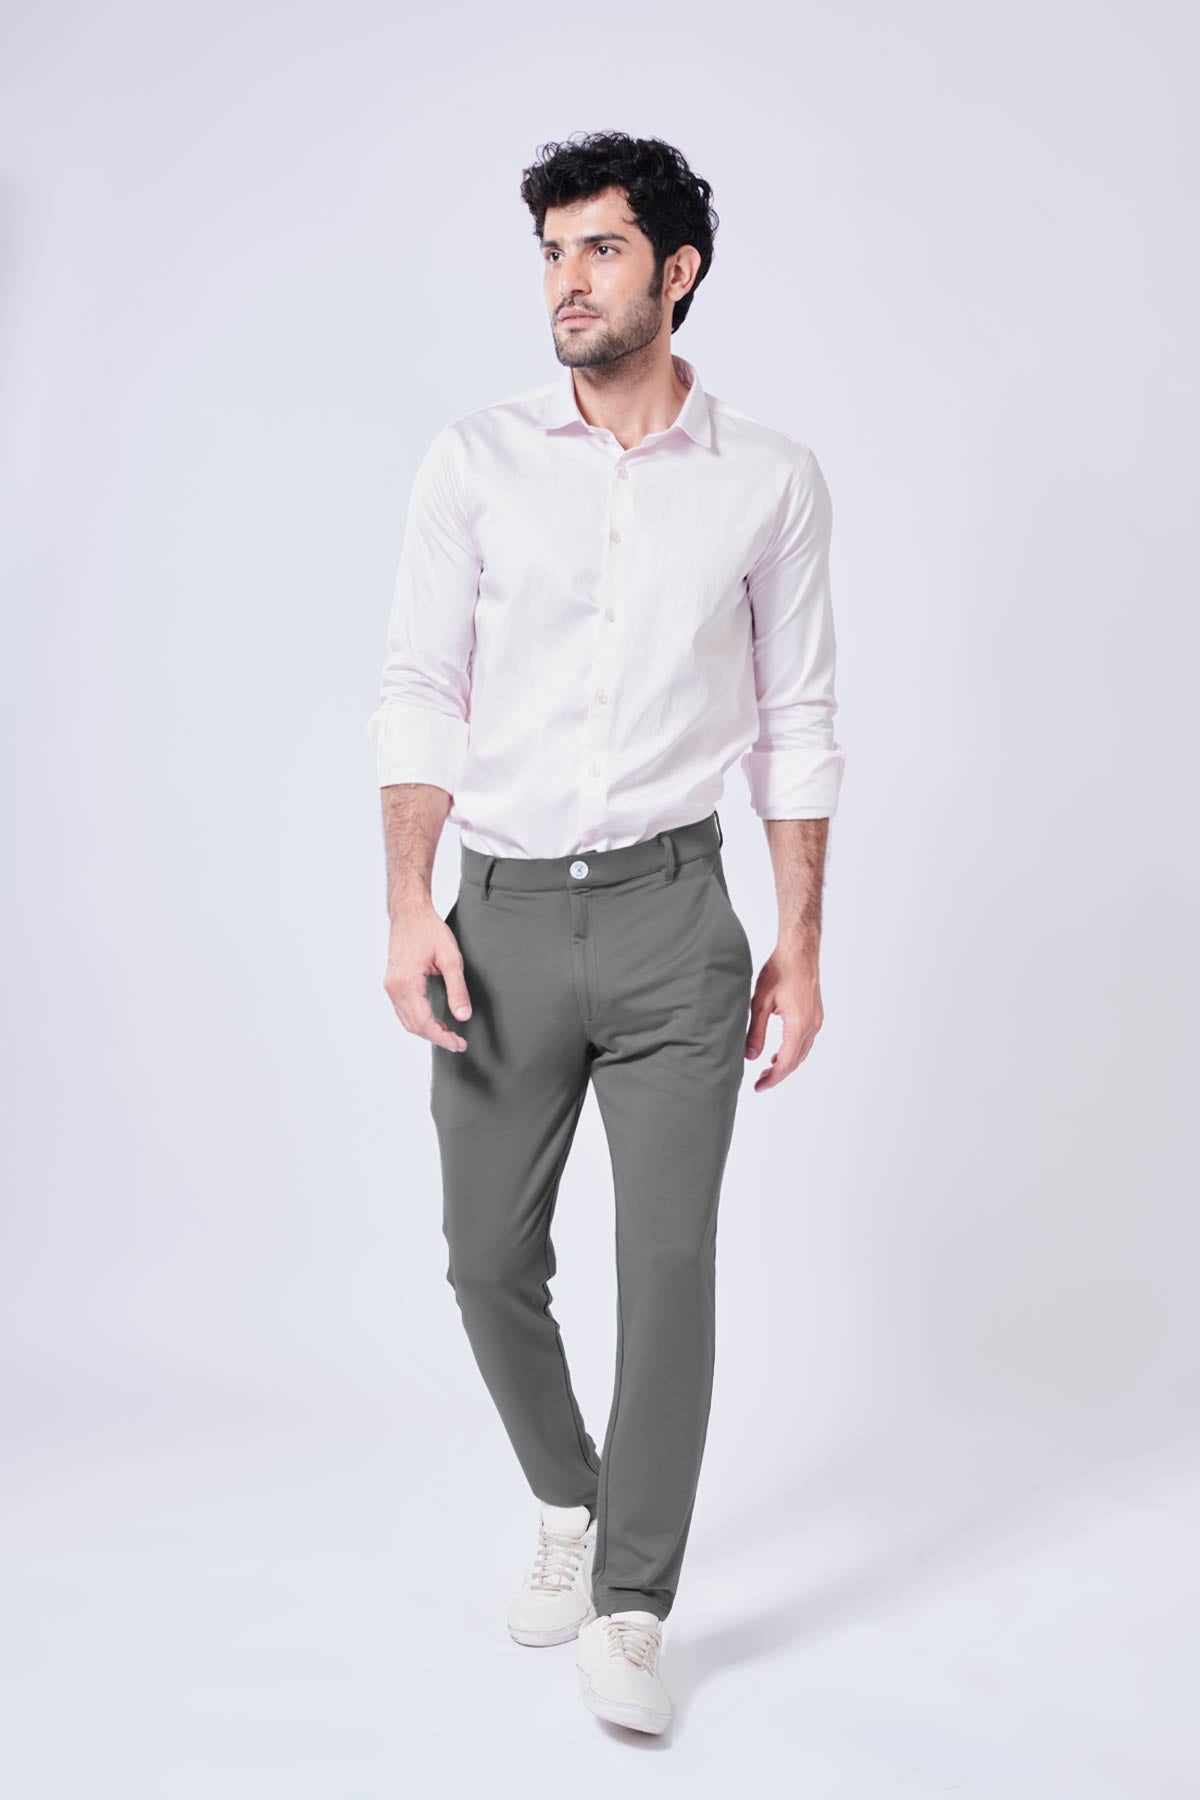 The Grey Pant Beyours Essentials Private Limited